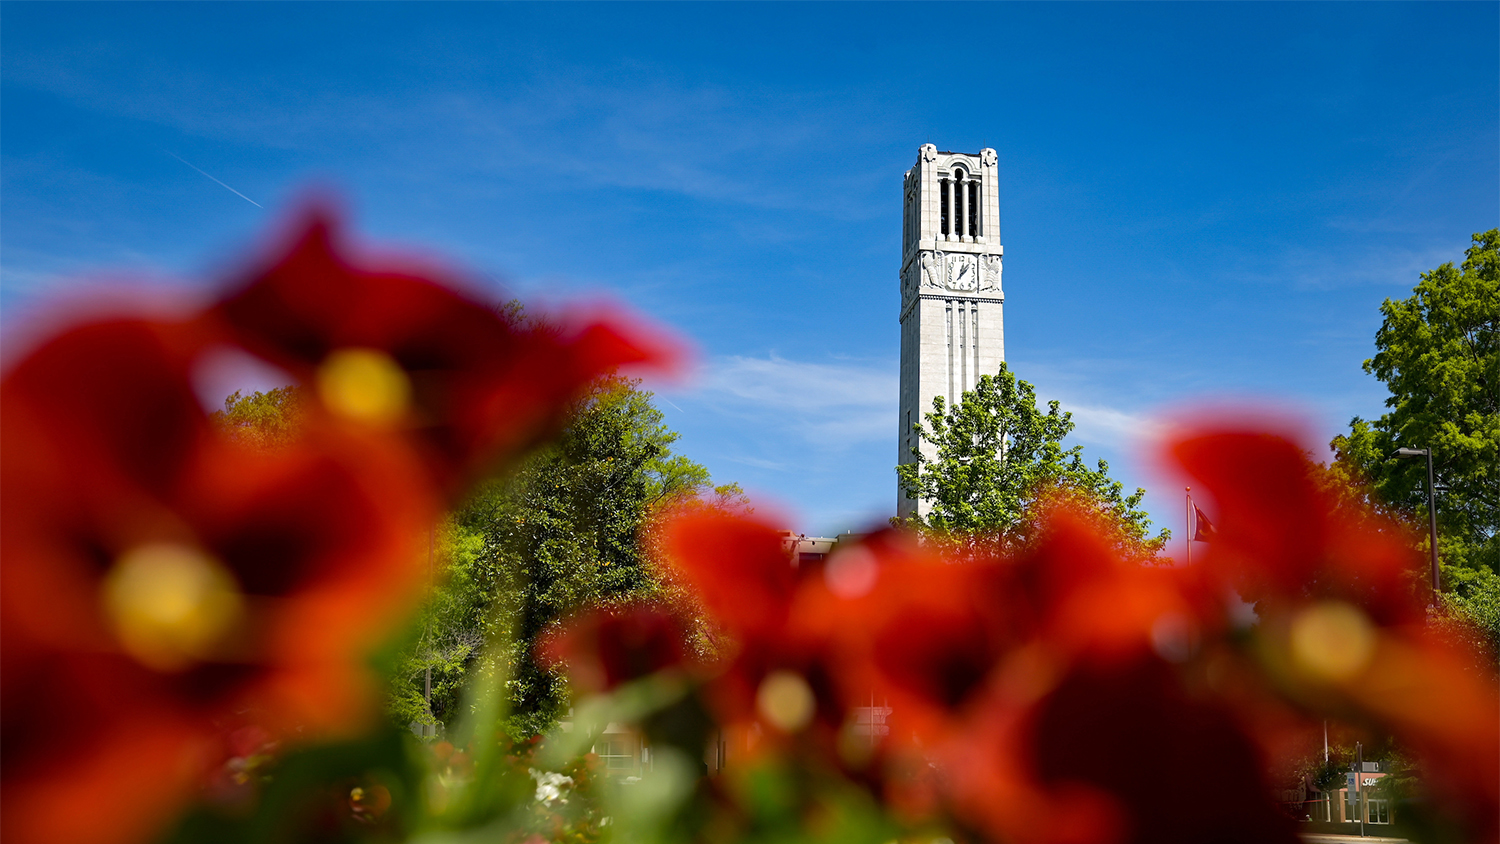 Spring blooms around the Memorial Belltower on an April afternoon. Photo by Becky Kirkland.